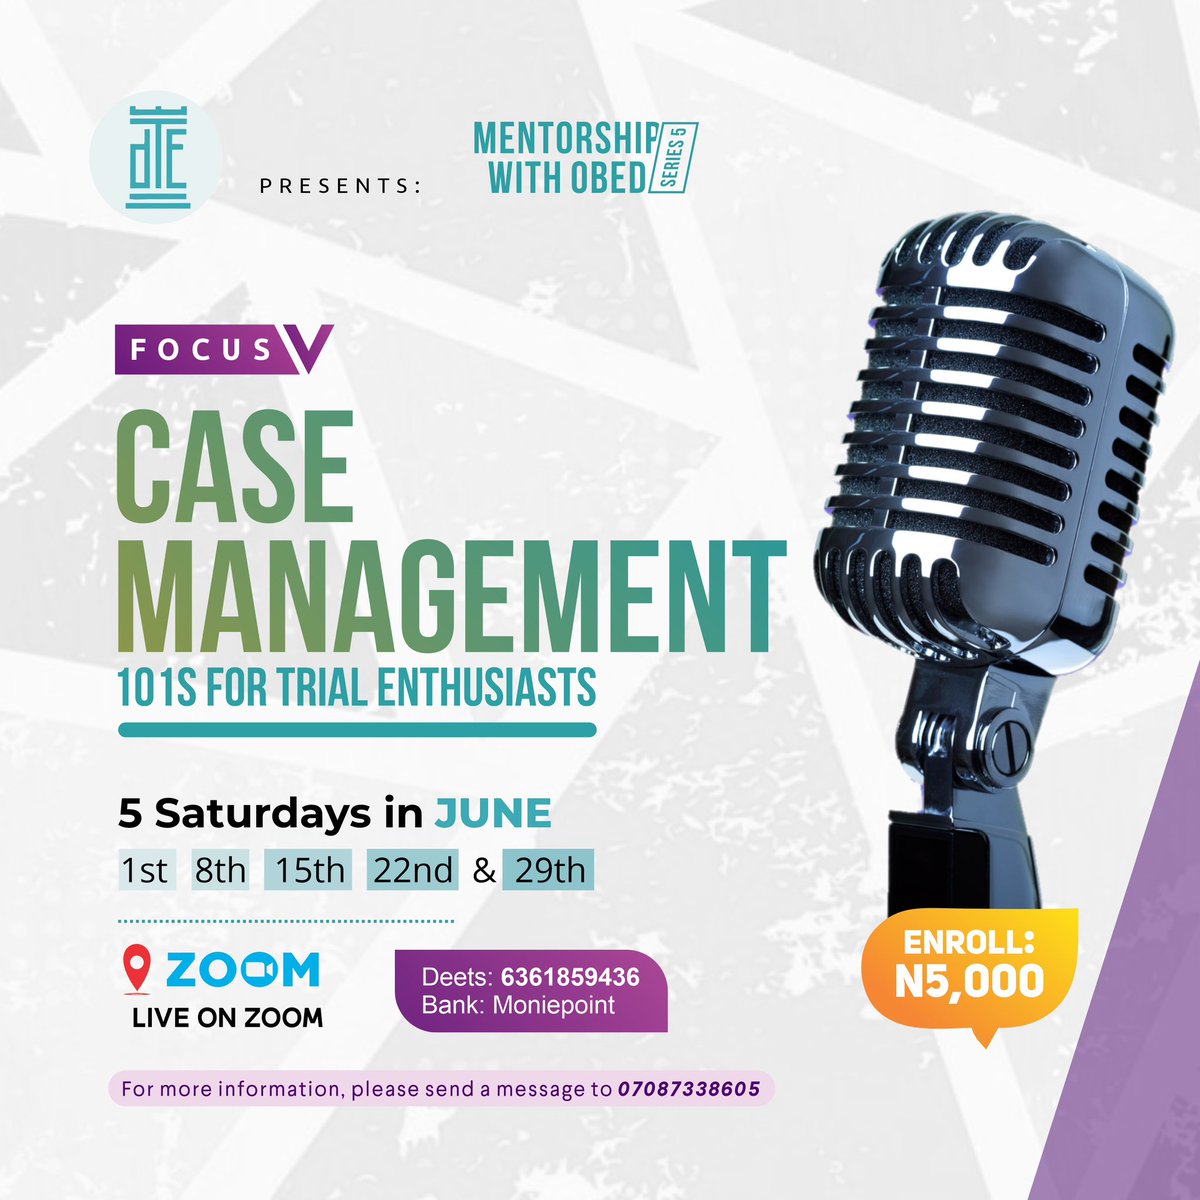 Dear trial enthusiasts I imagine the flier below meets you well. Mentorship with Obed (MWO) Series 5 is here!! The focus is on case management. Let’s talk strategies. Please check the flier for more information, and leave a direct message if interested in this workshop. 🥂